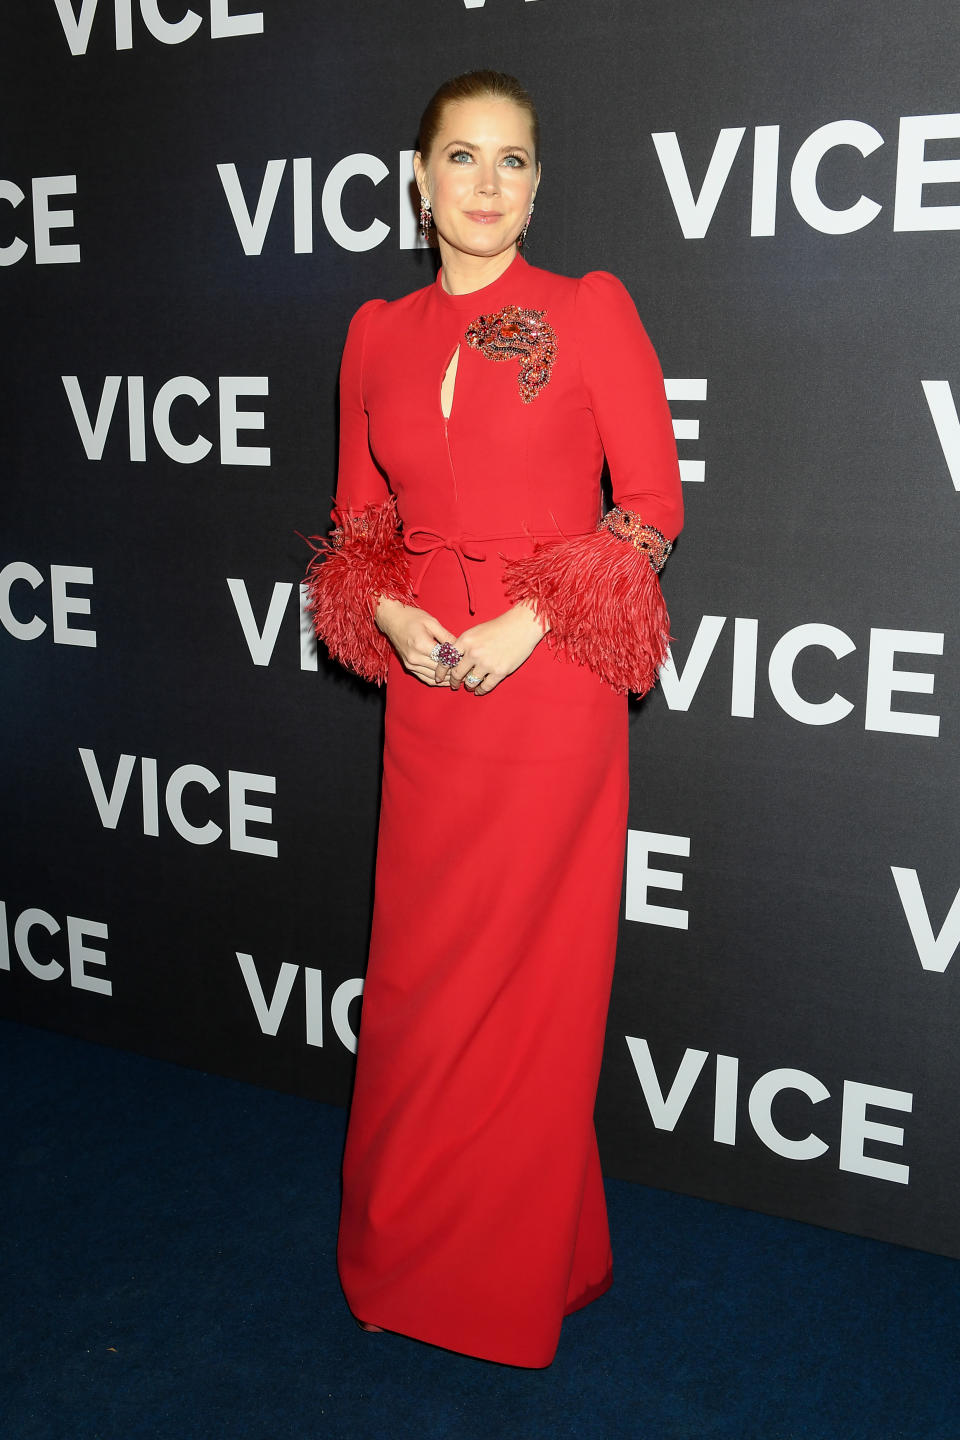 Amy Adams at the premiere of ‘Vice’